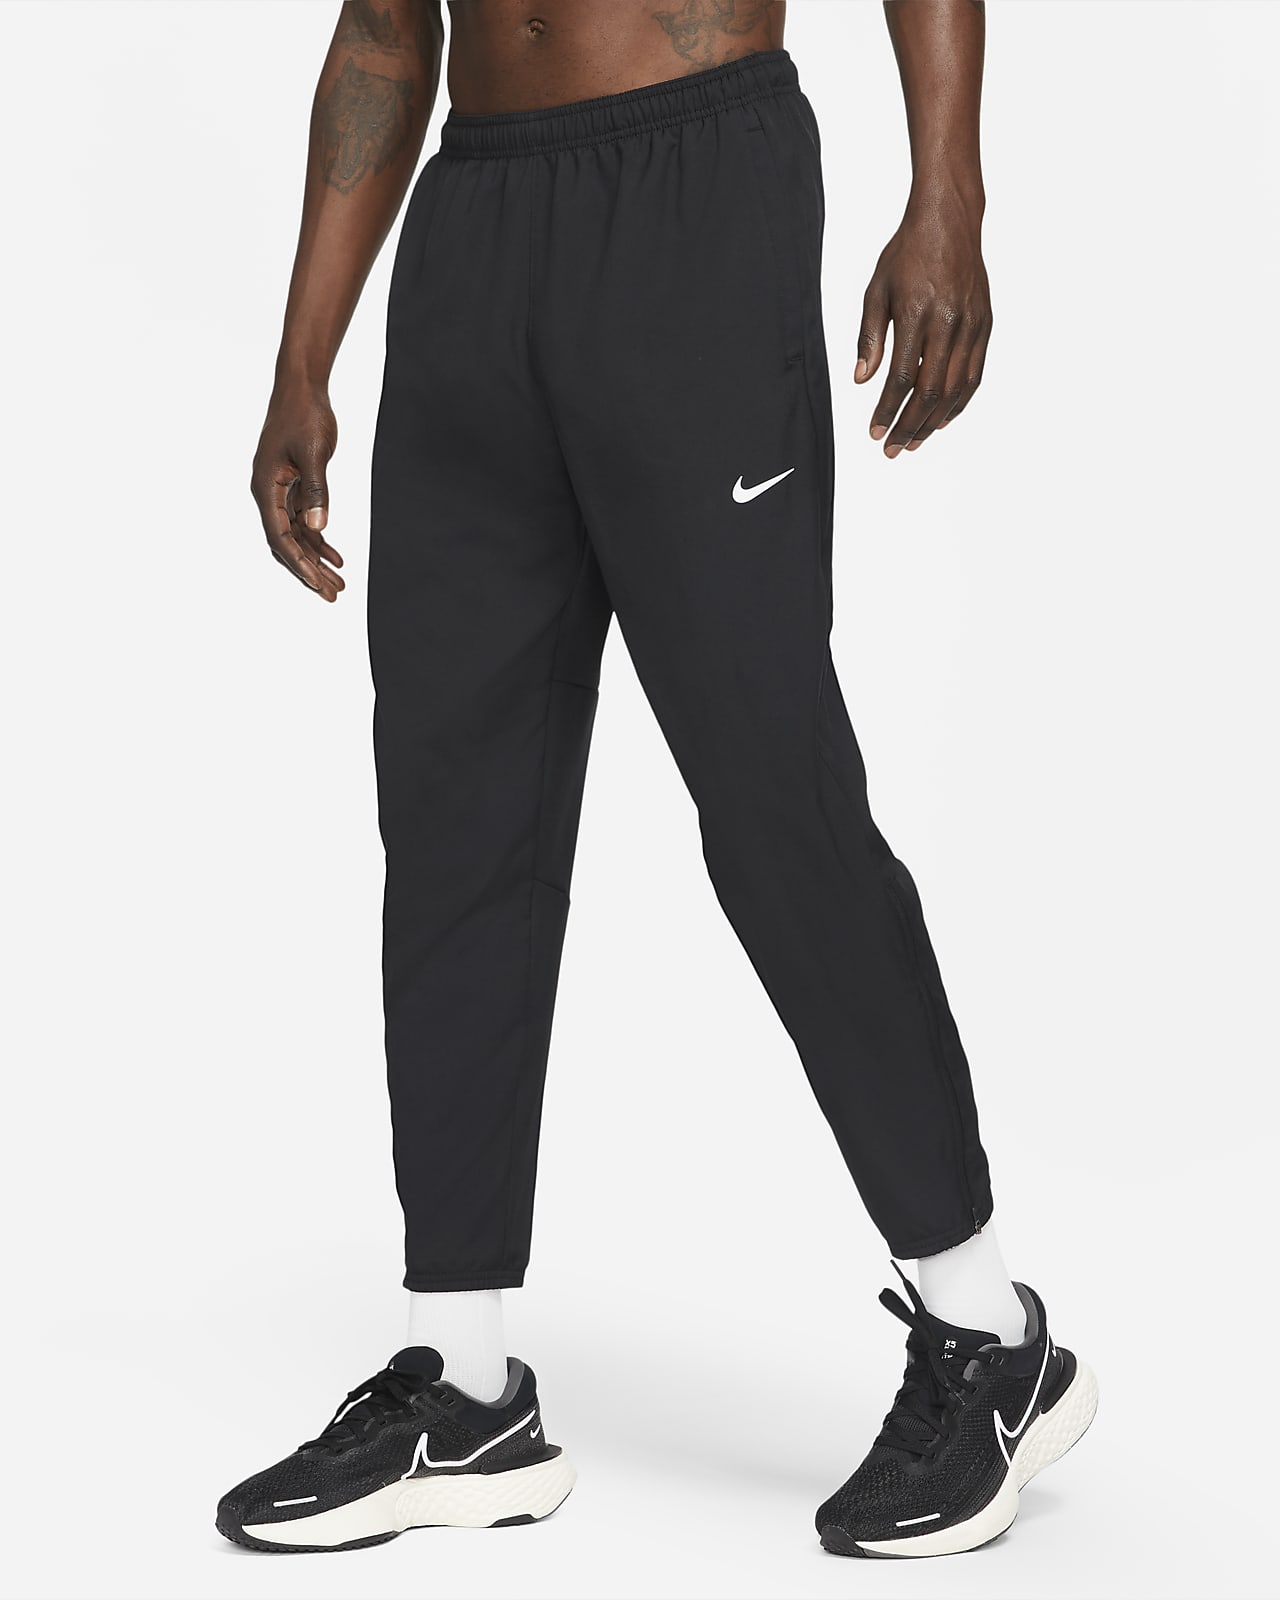 Nike Dri-FIT Challenger Men's Woven Running Trousers. Nike SI